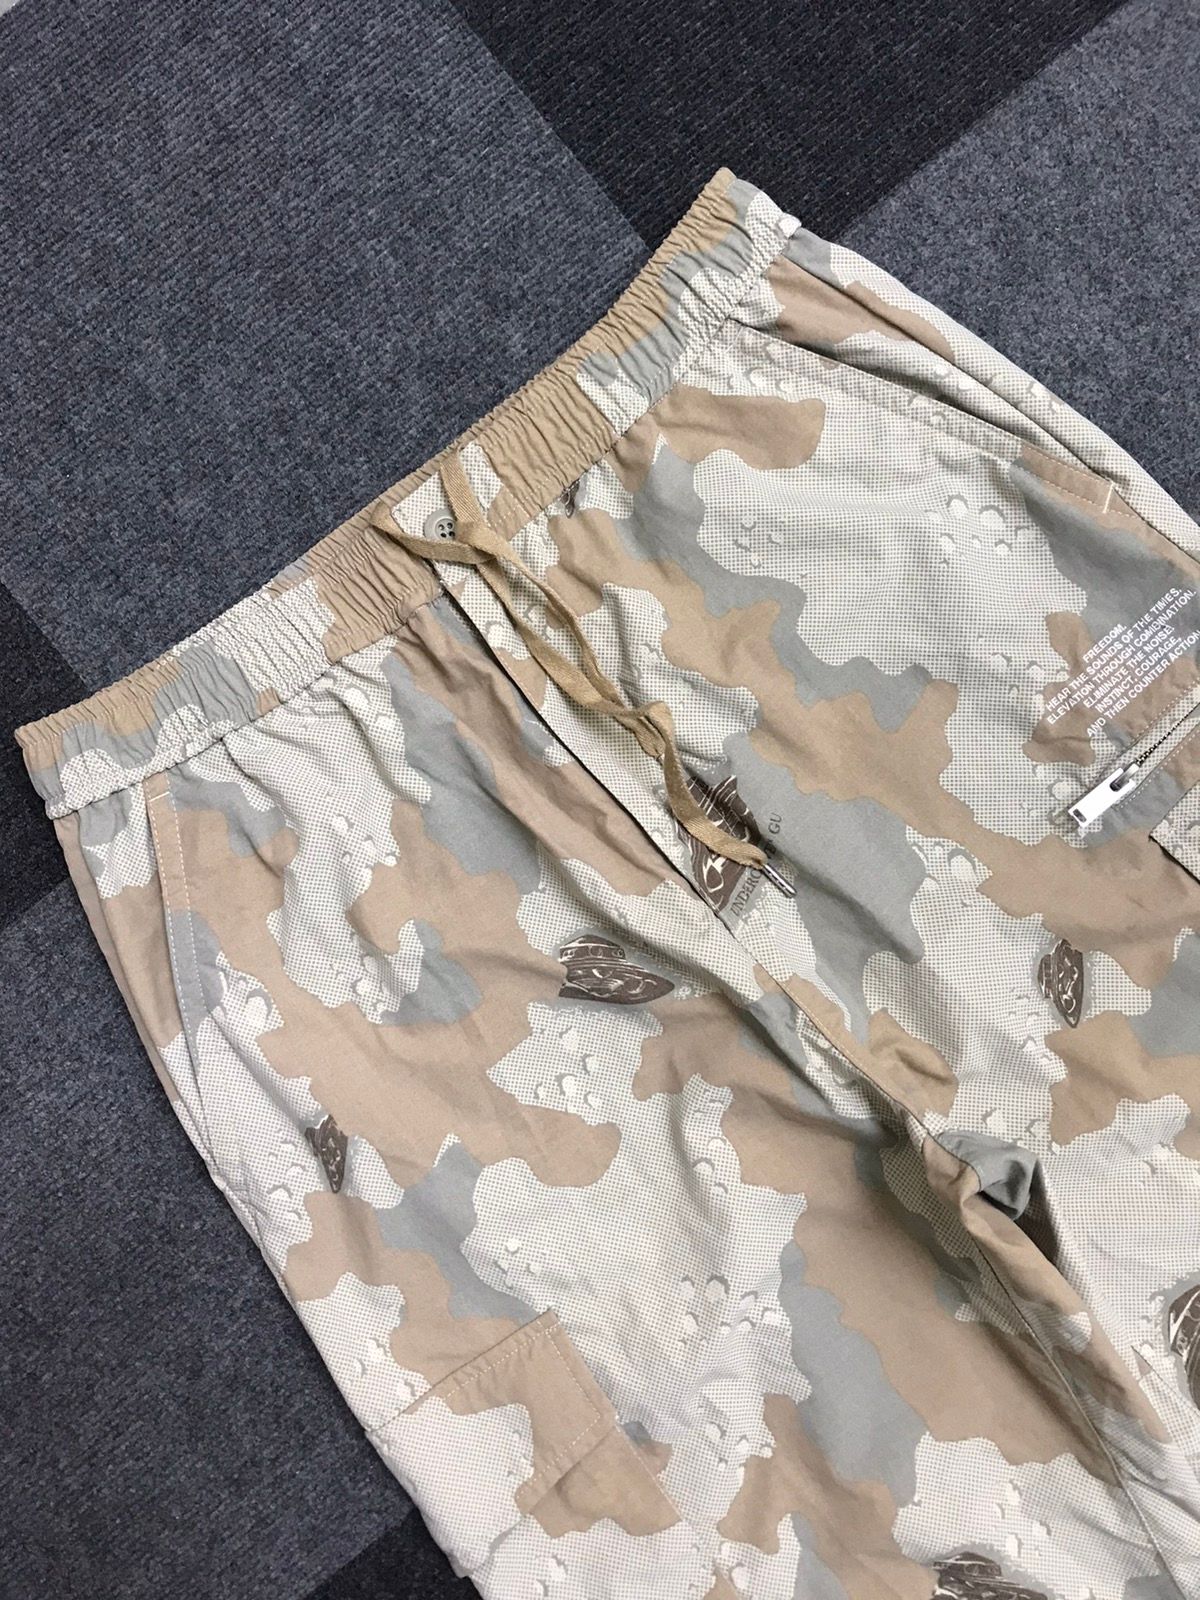 UNDERCOVER X GU Hype Beast Style Camo Multipockets Pant - 2